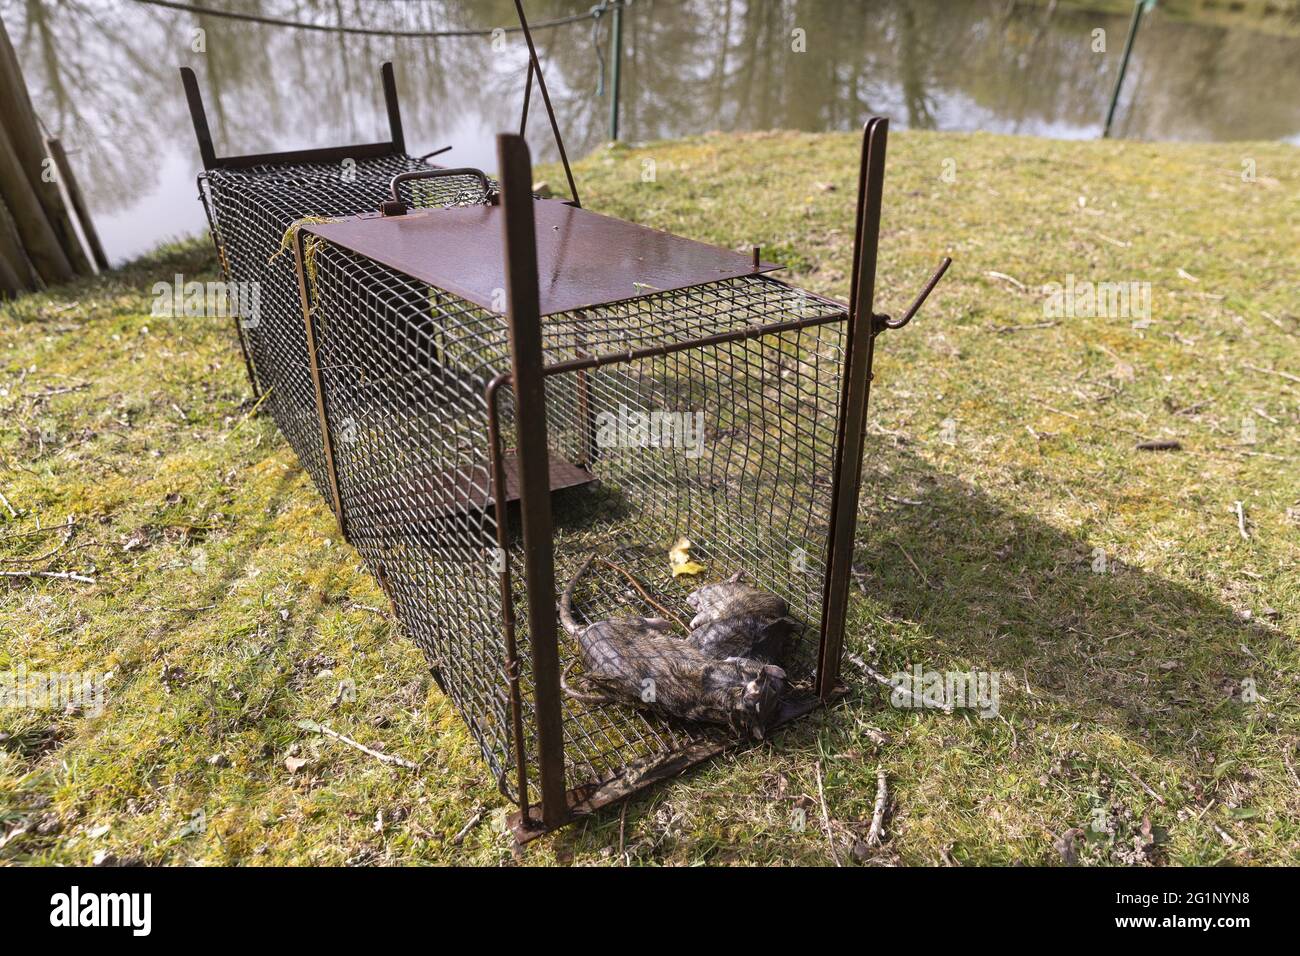 France, Ille et Vilaine, At the edge of a pond, nutria trap digging the dikes, Norway rats captured in the trap Stock Photo